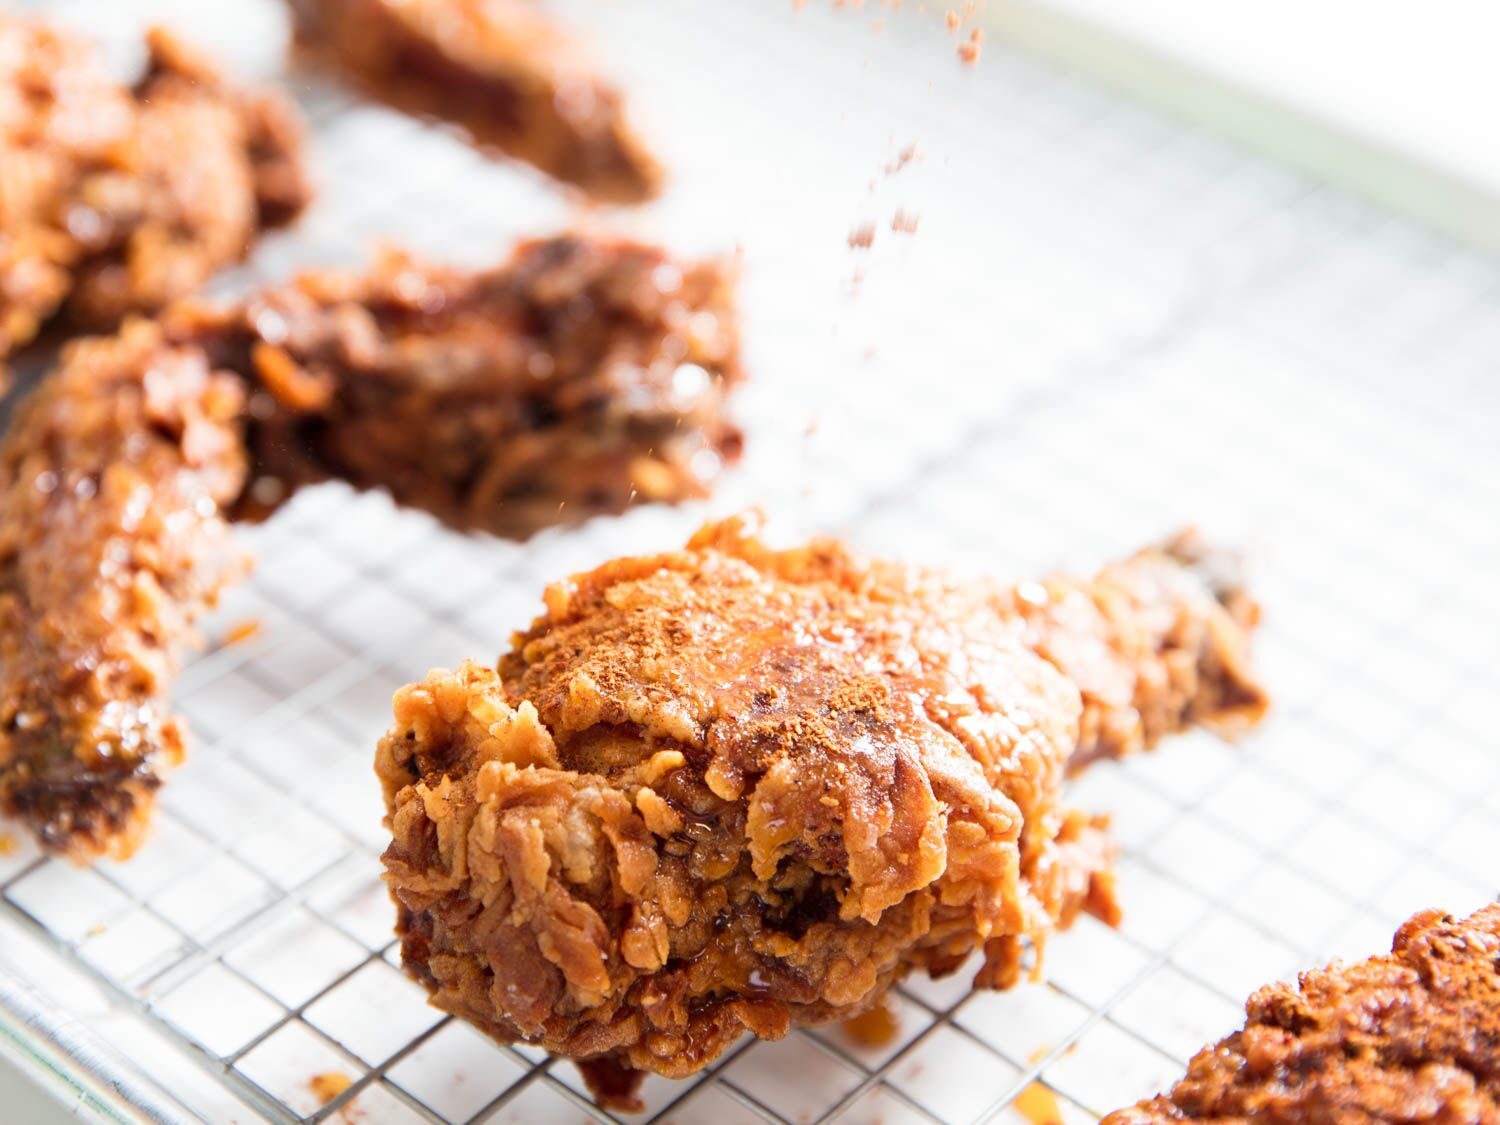 Extra-Crispy Fried Chicken With Caramelized Honey and Spice